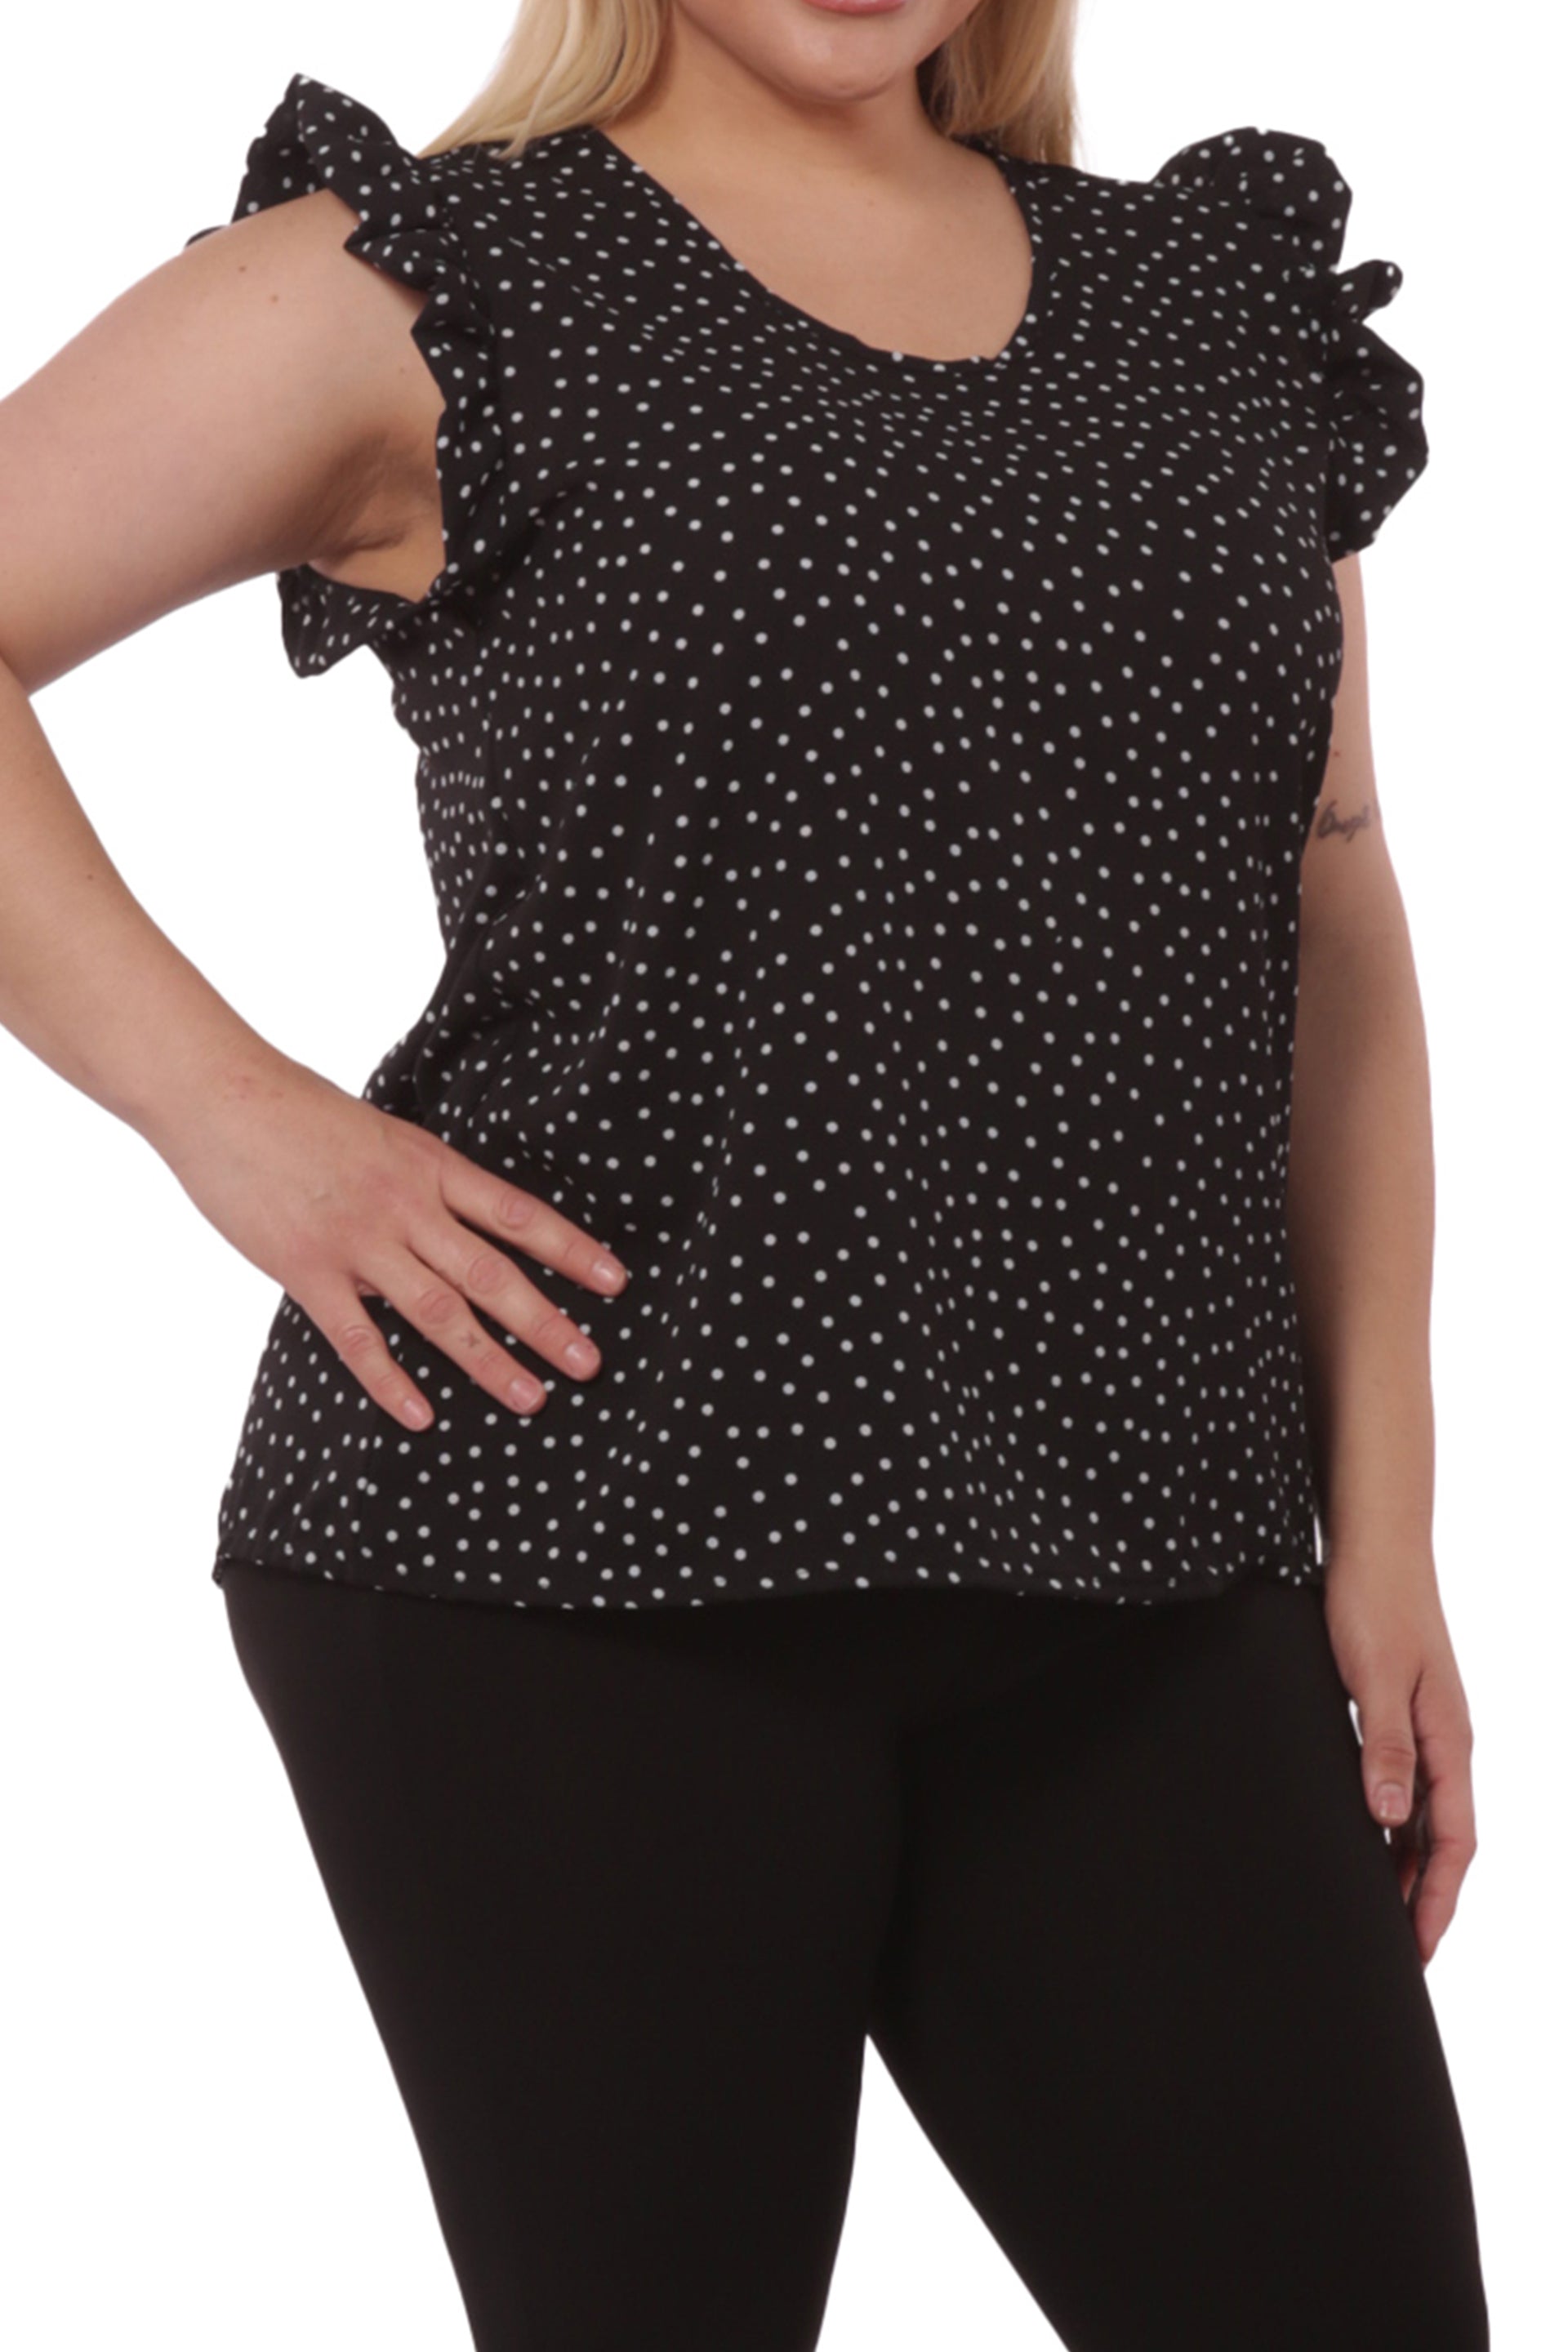 Wholesale Womens Plus Size Tops With Ruffle Armhole Detail - Black - S&G Apparel